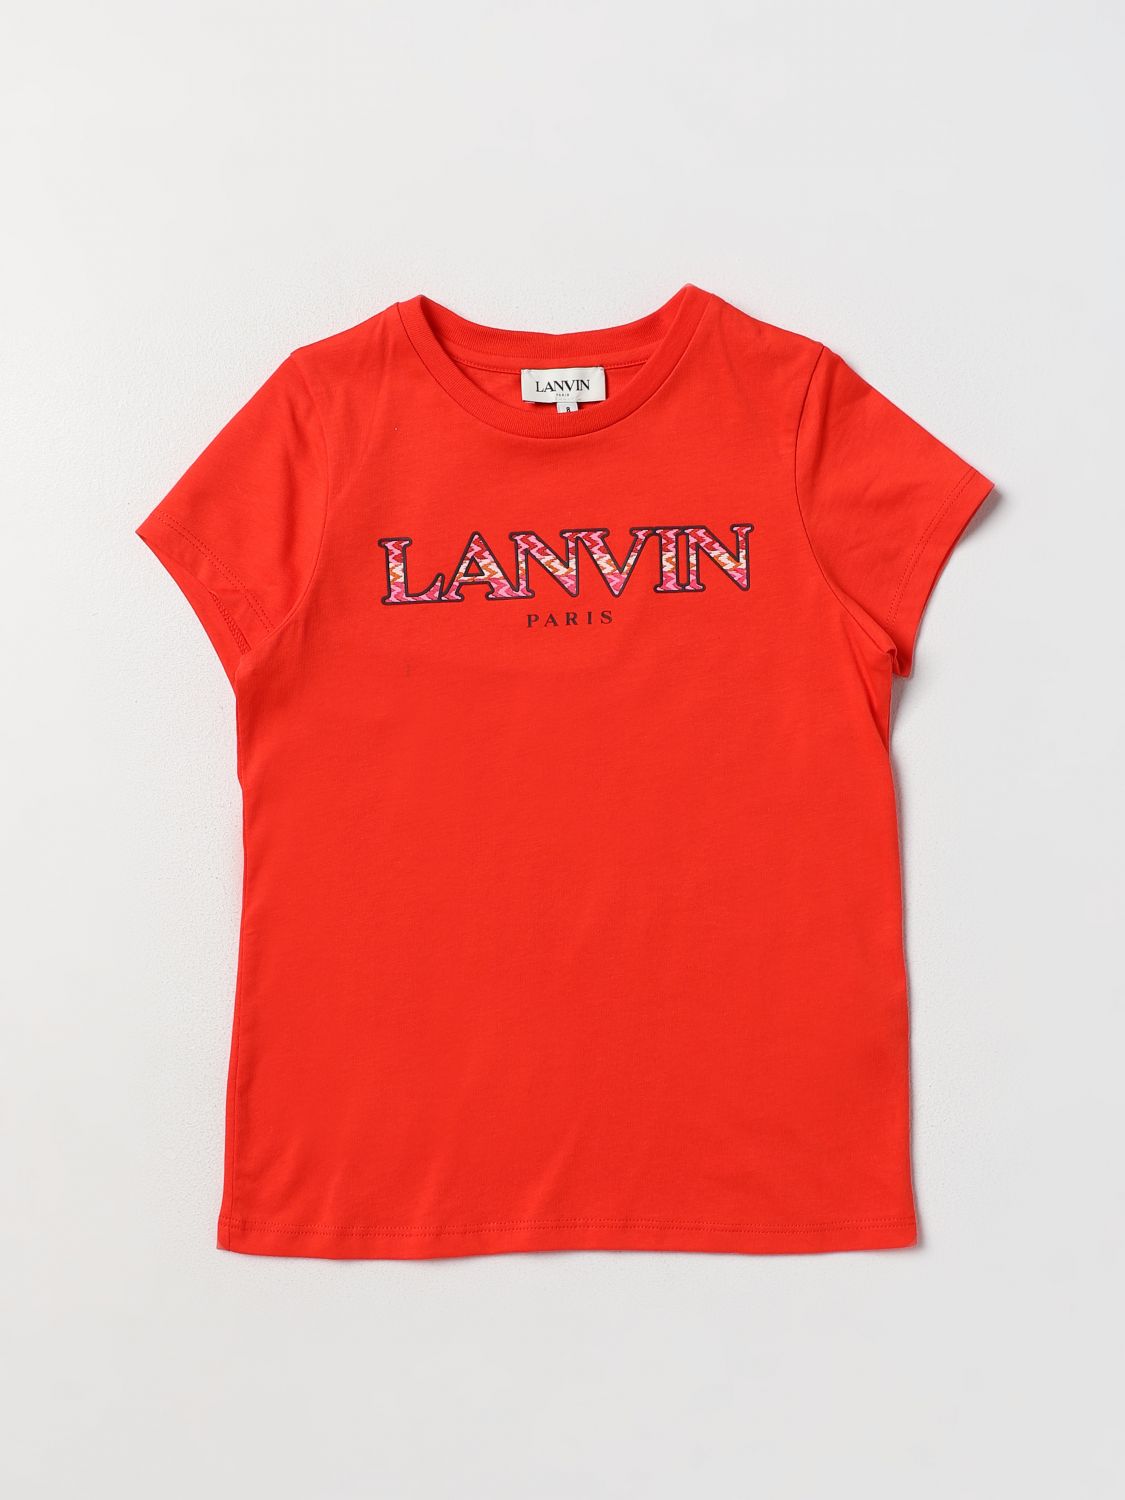 Lanvin Kids' T-shirt  Kinder Farbe Rot In Red